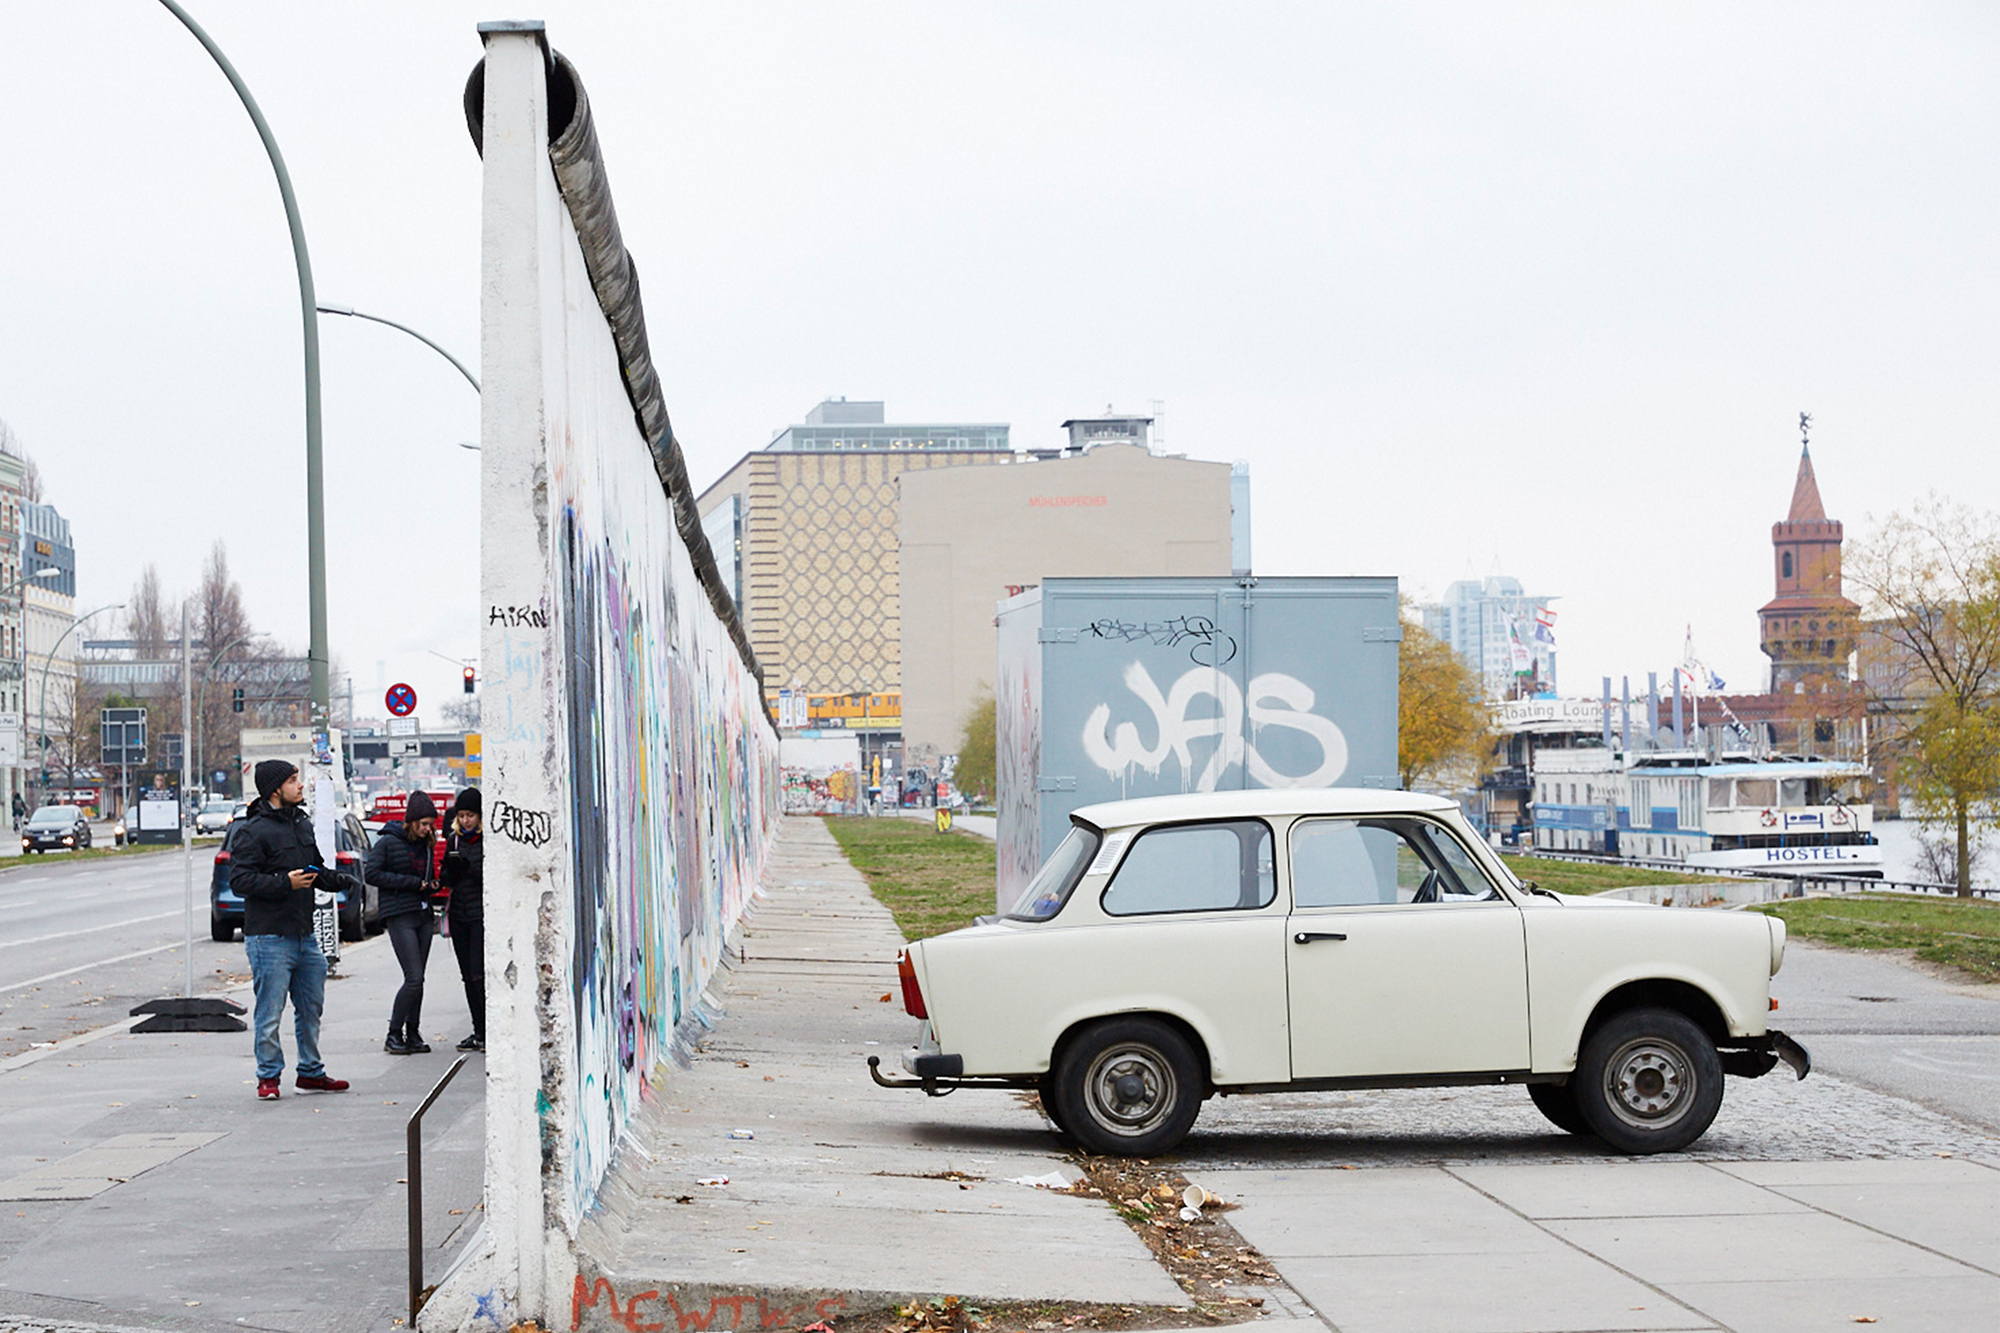 With views over Berlin Wall